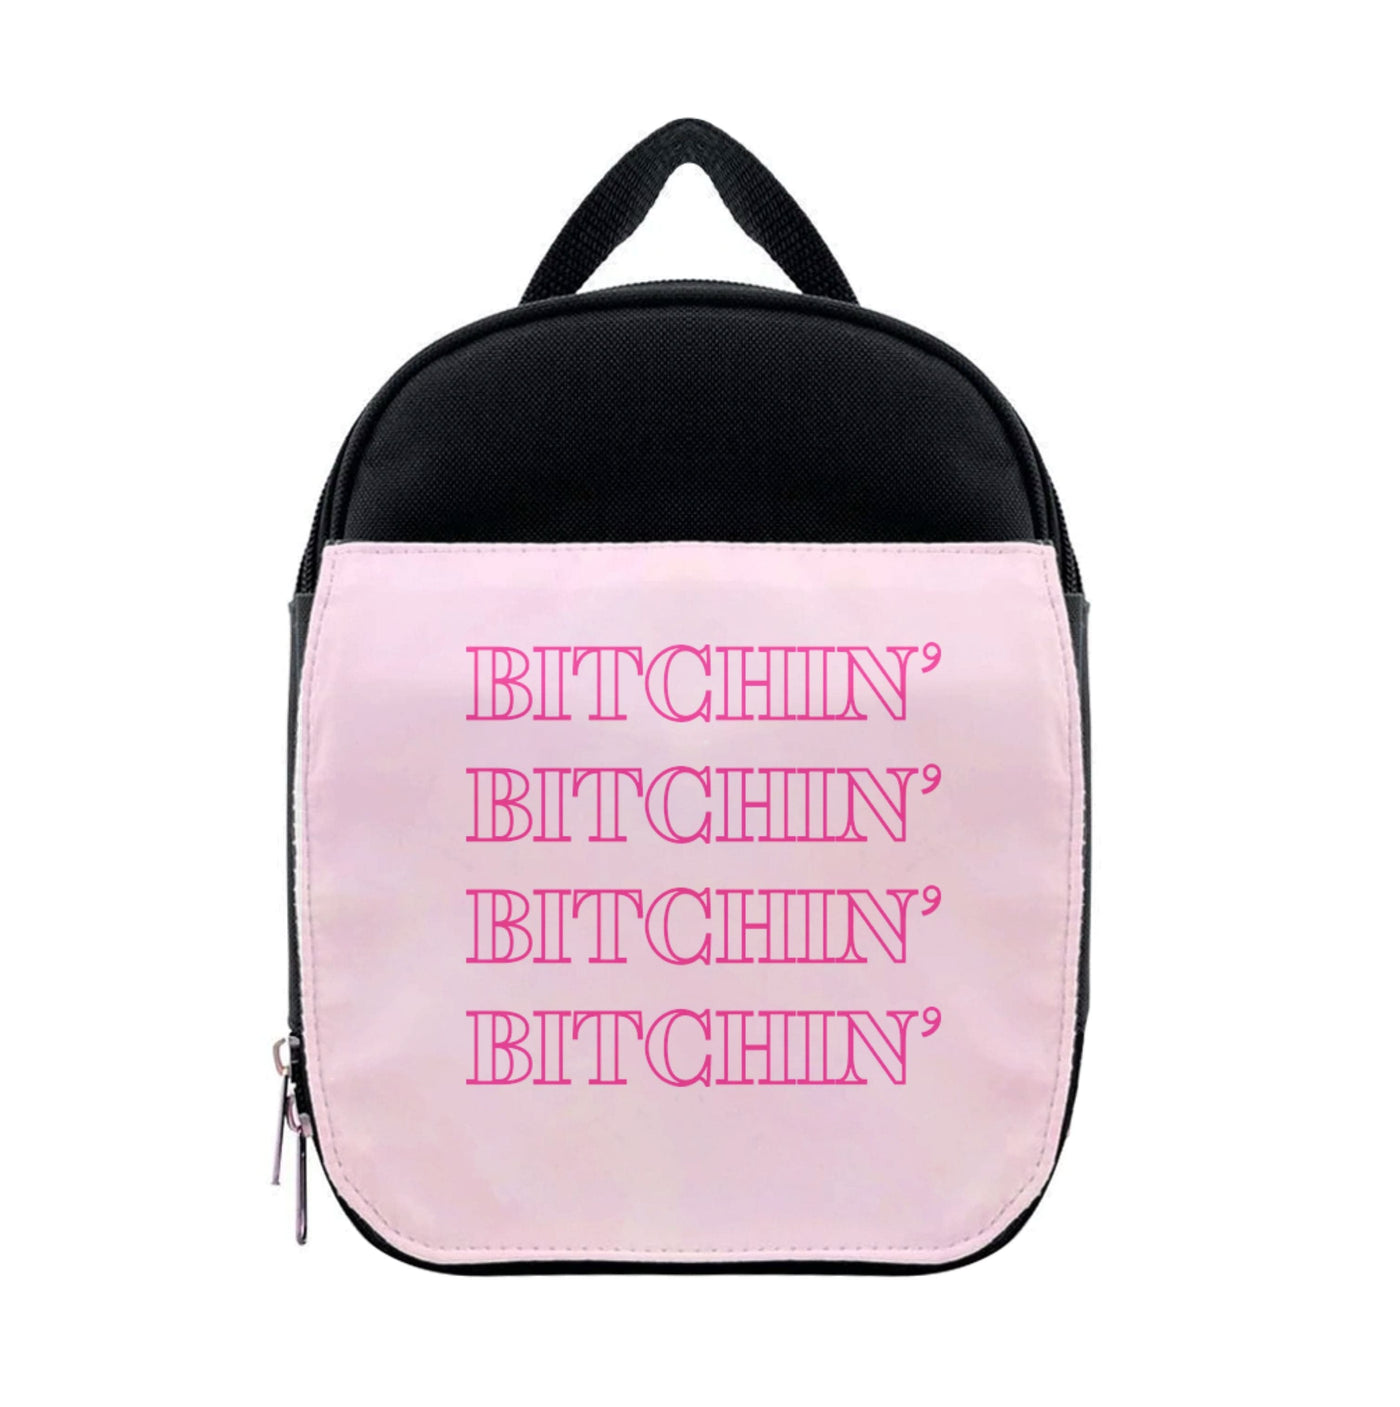 Bitchin' Repeated - Stranger Things Lunchbox